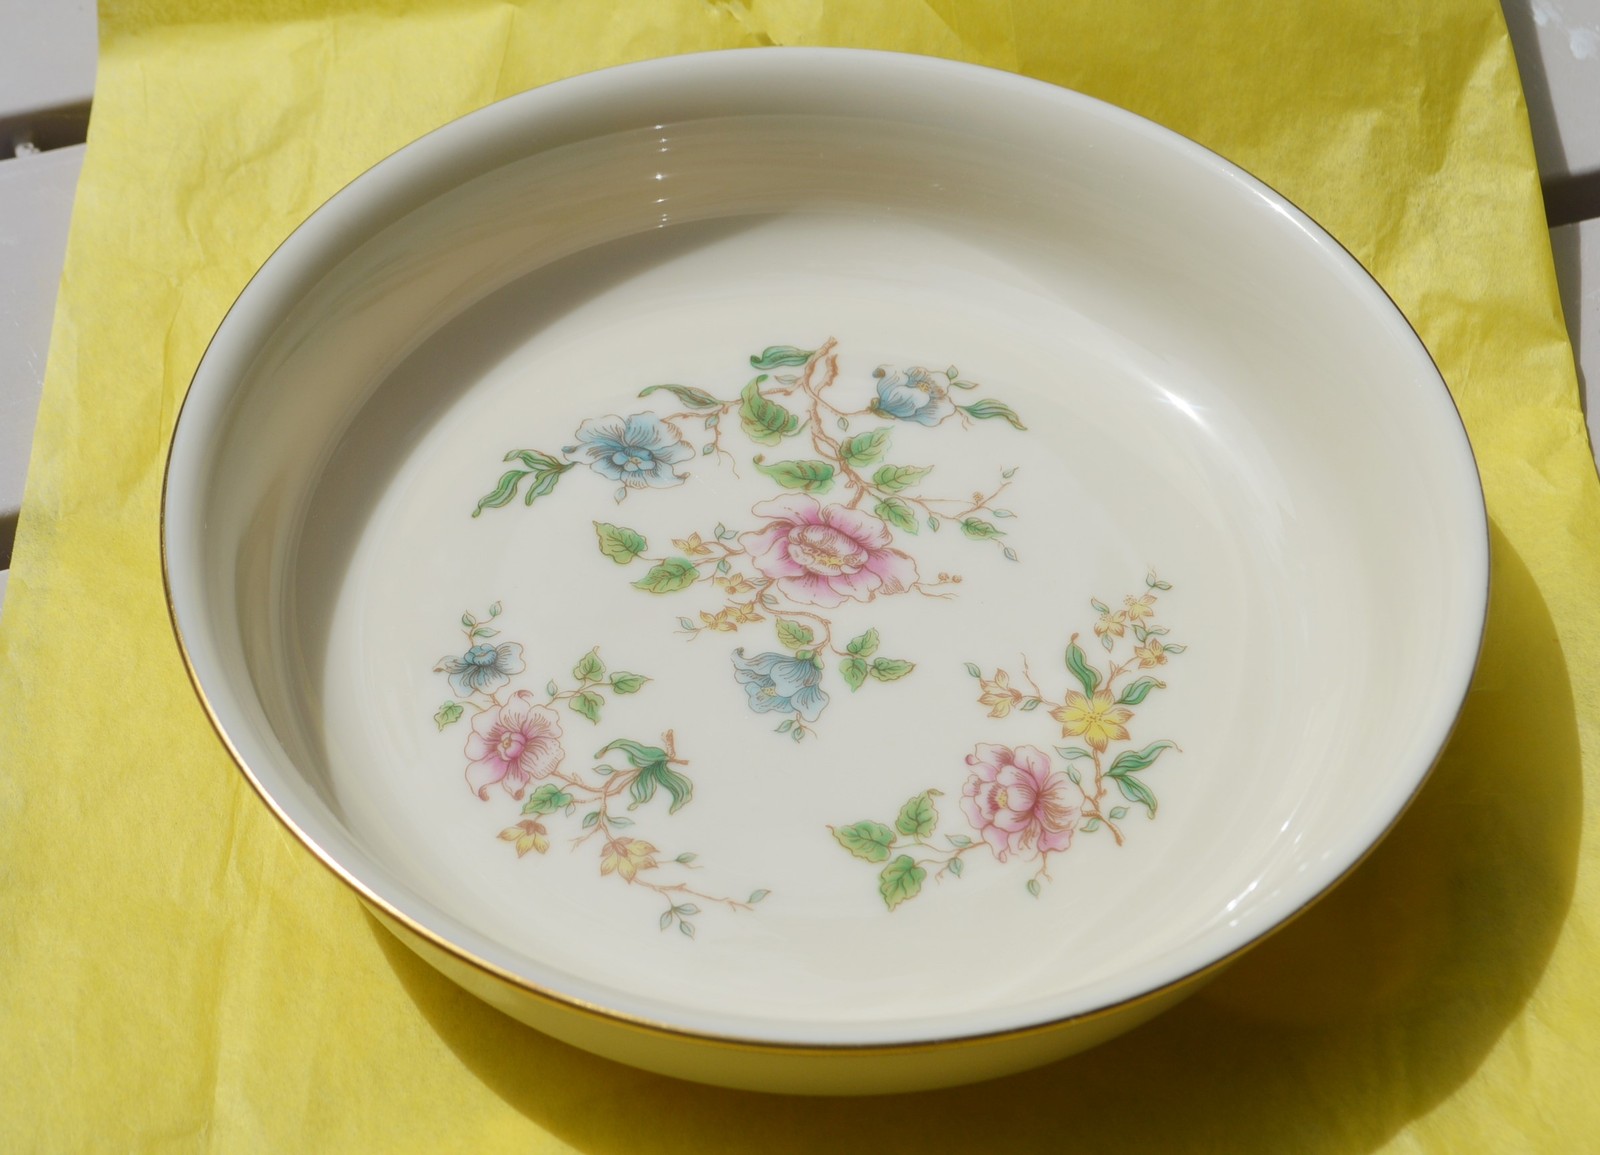 Primary image for Lenox Morning Blossom Coupe Soup Bowl, Excellent Condition